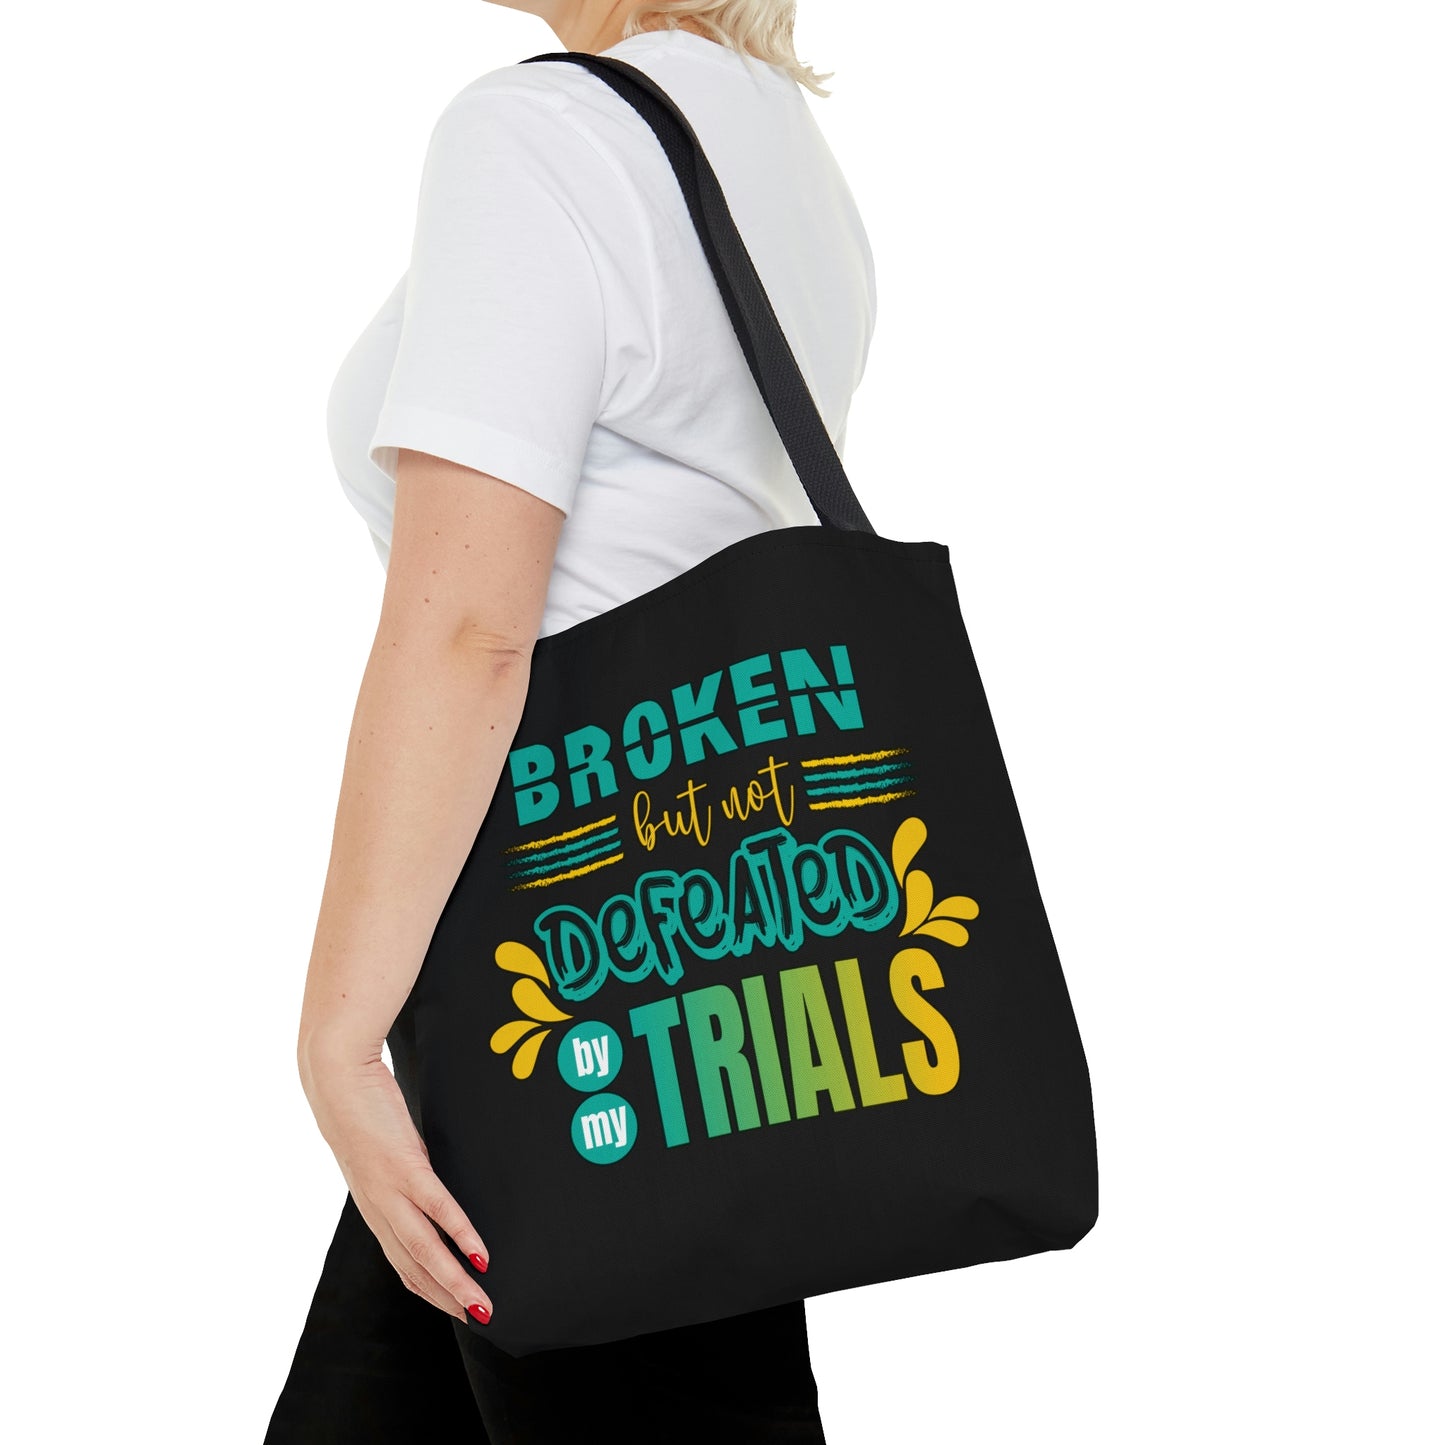 Broken But Not Defeated By My Trials Tote Bag